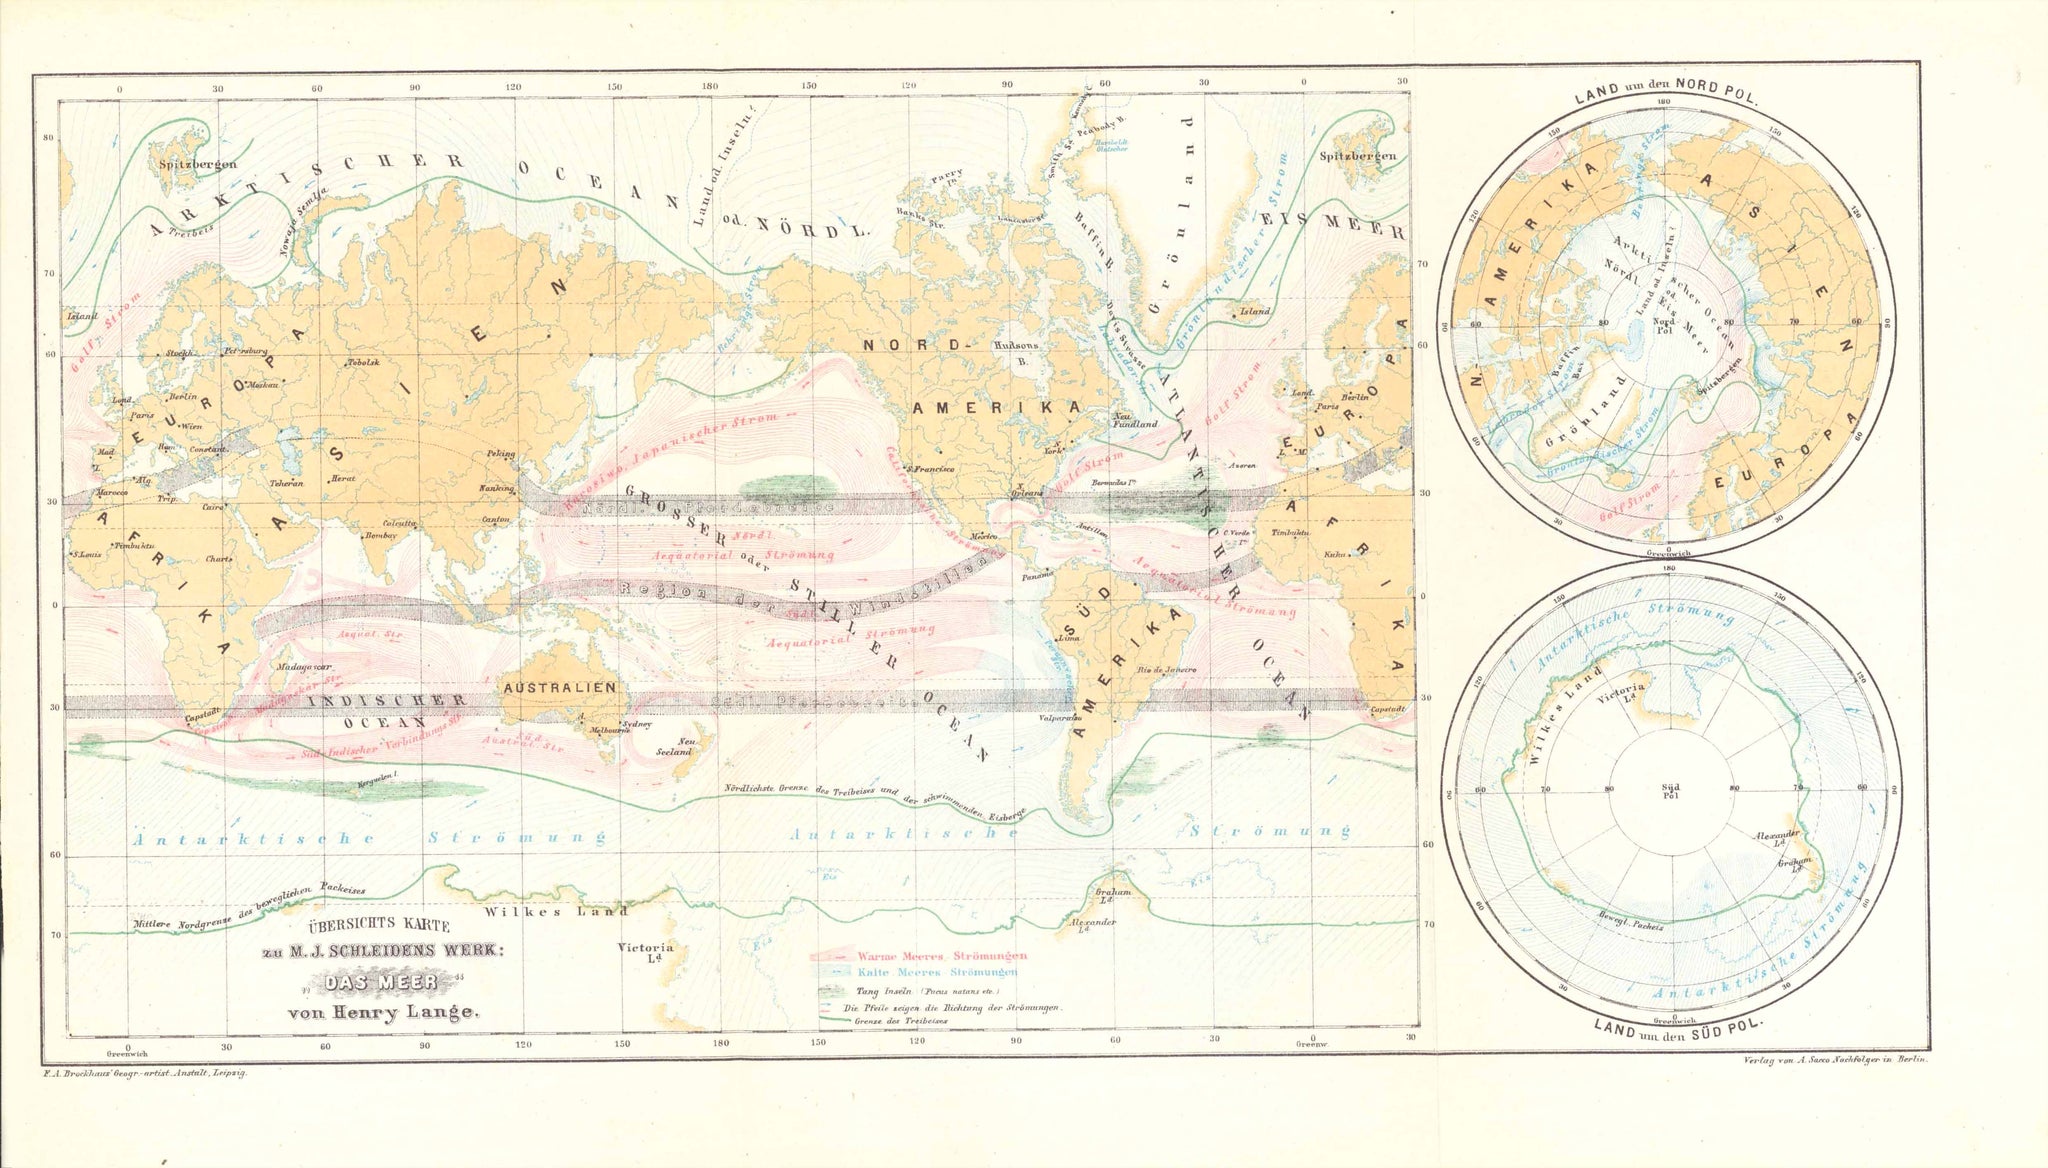 "Uebersichtskarte zu M. J. Schleidens Werk: "Das Meer" von Henry Lange"  Very interesting chromolithograph map of the world's oceans. Published 1869. The warm currents named are shown with a pink color and the cold currents named with a blue color.  Original antique print    For a 30% discount enter MAPS30 at chekout 